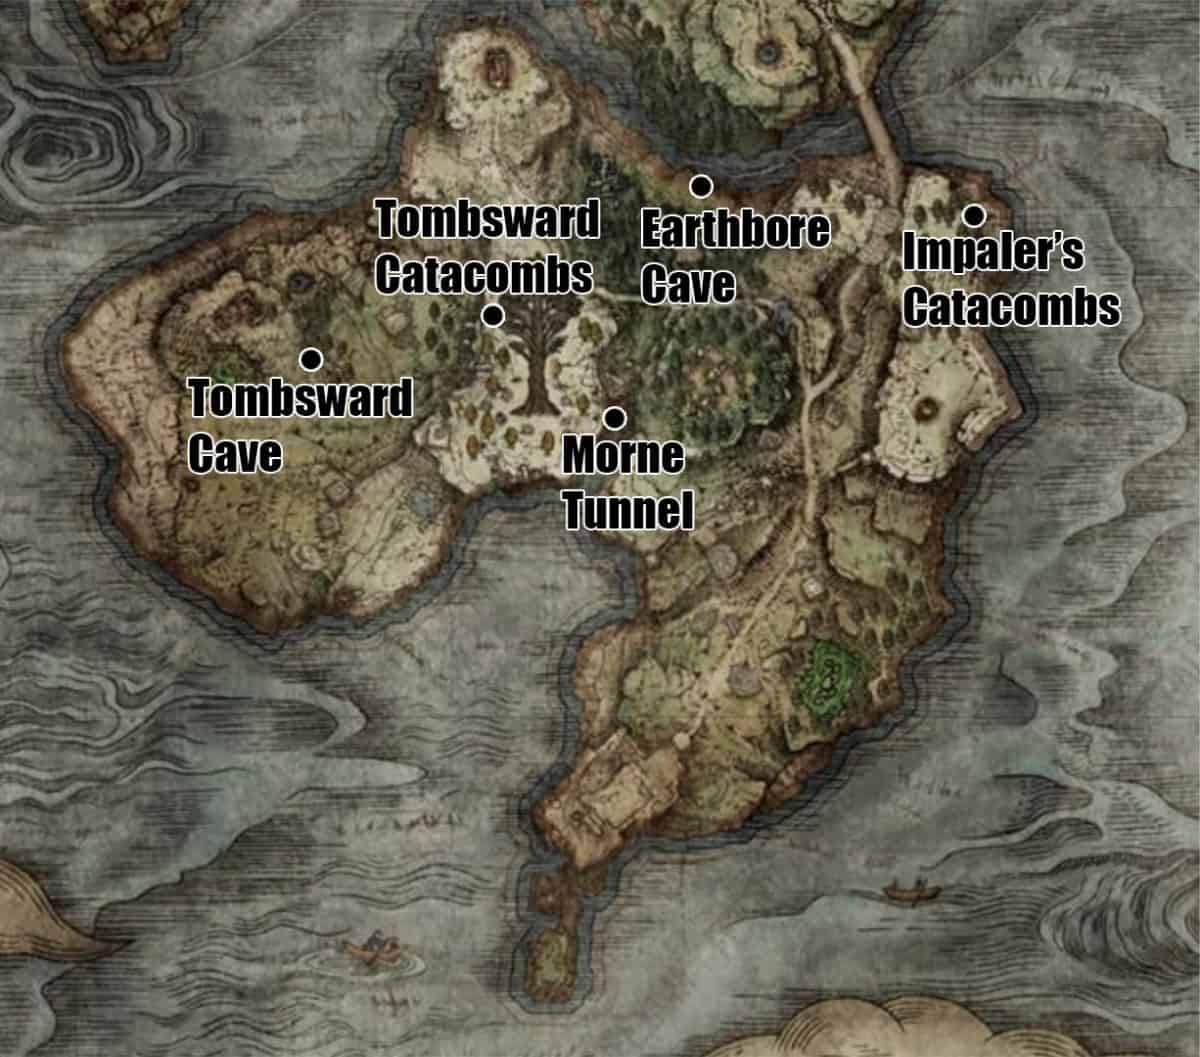 Weeping Peninsula Dungeon Locations Map